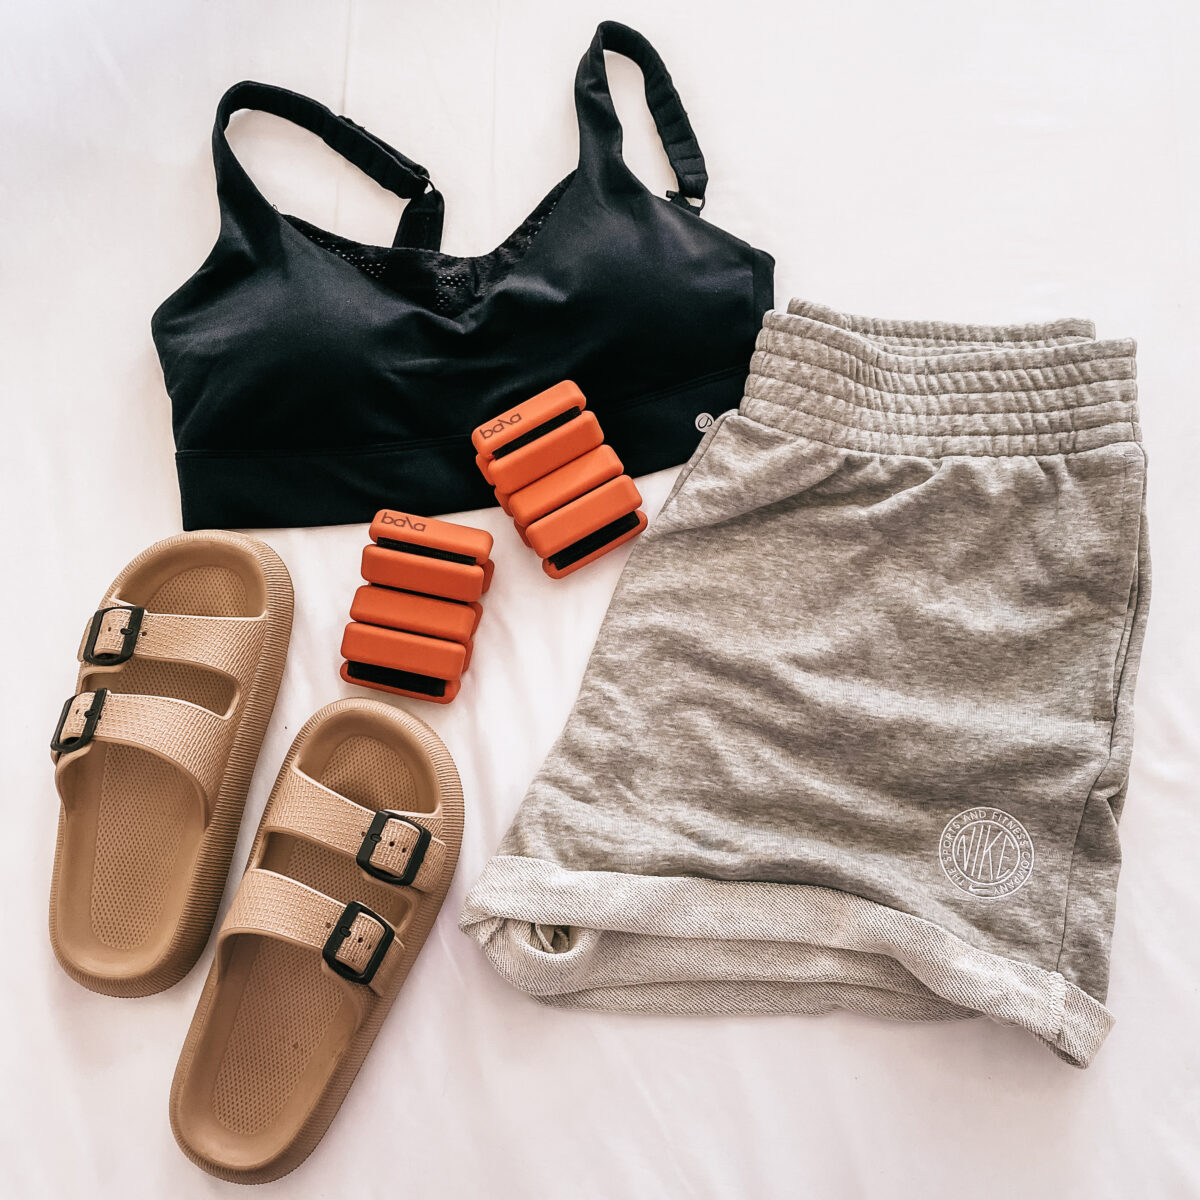 My must -have picks for yoga and physical therapy. Sports bra, weights, sandals and shorts
